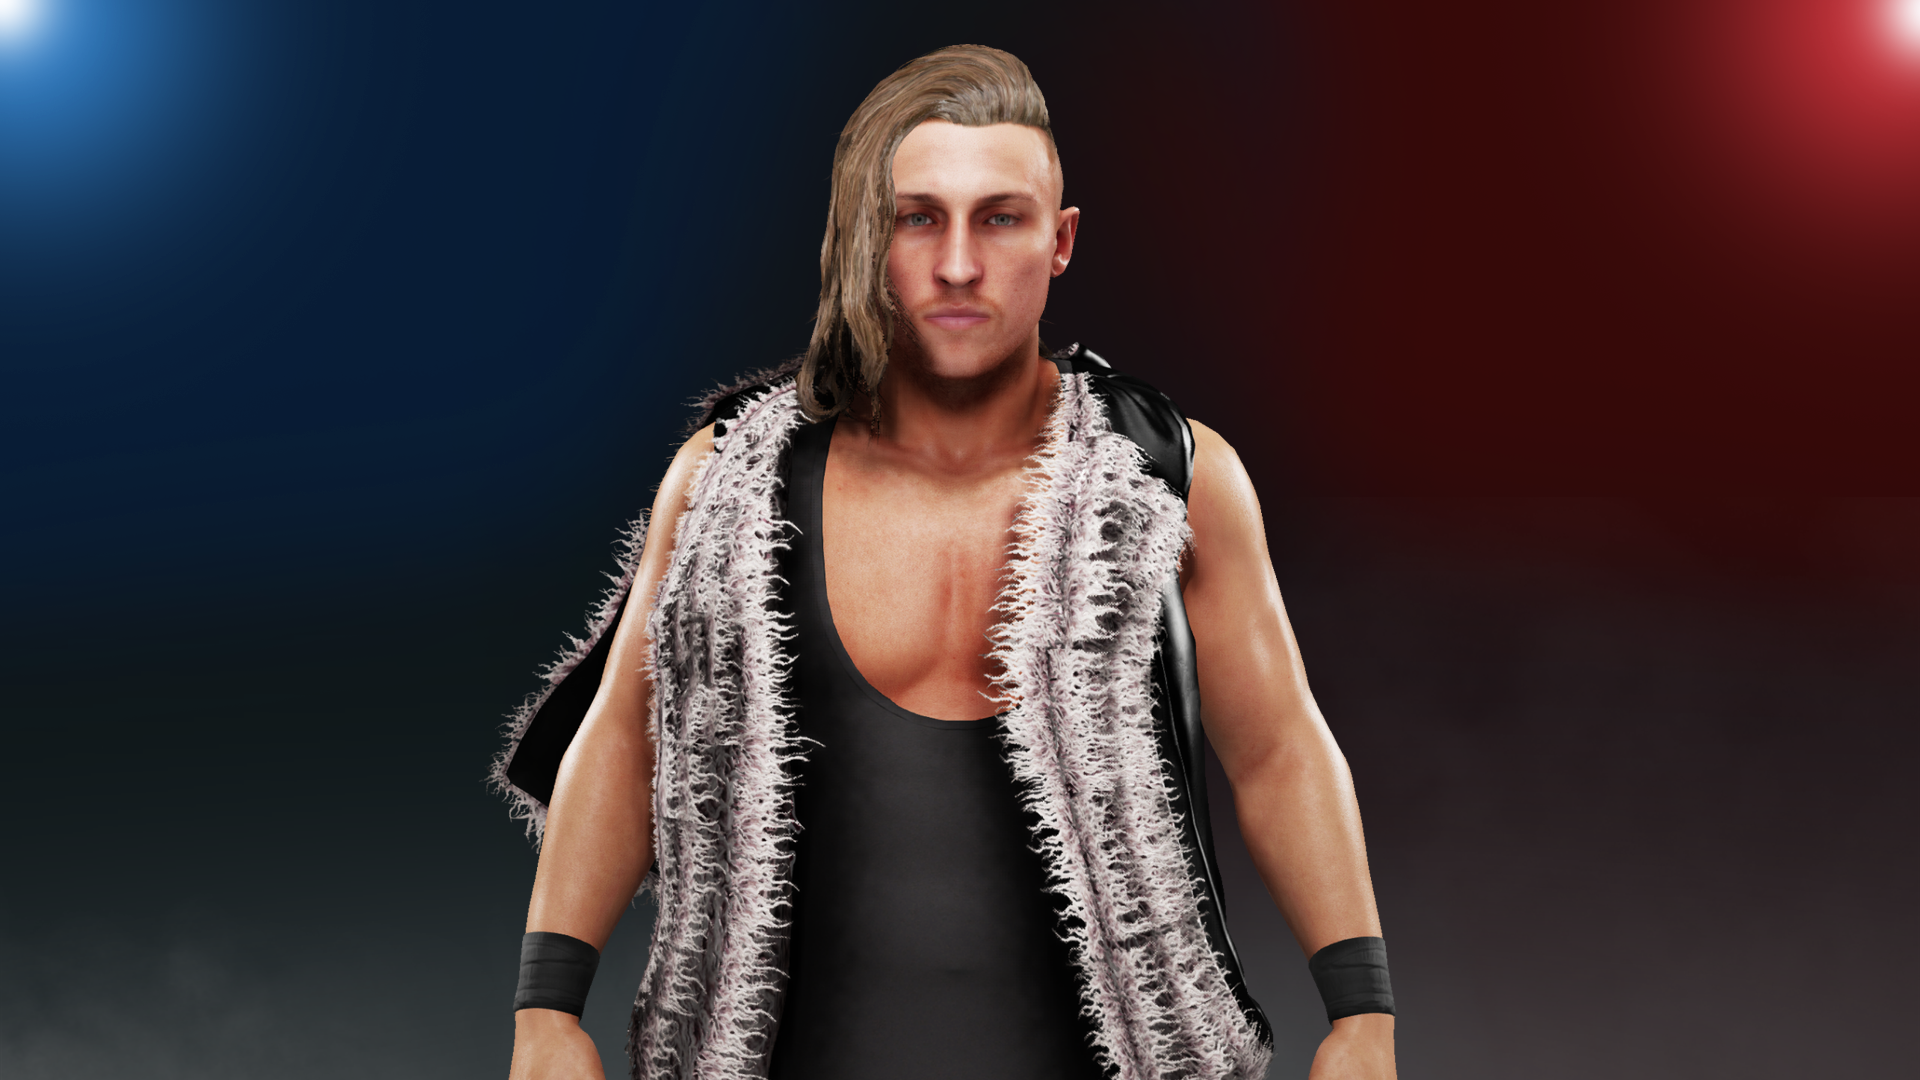 Icon for Bruiserweight